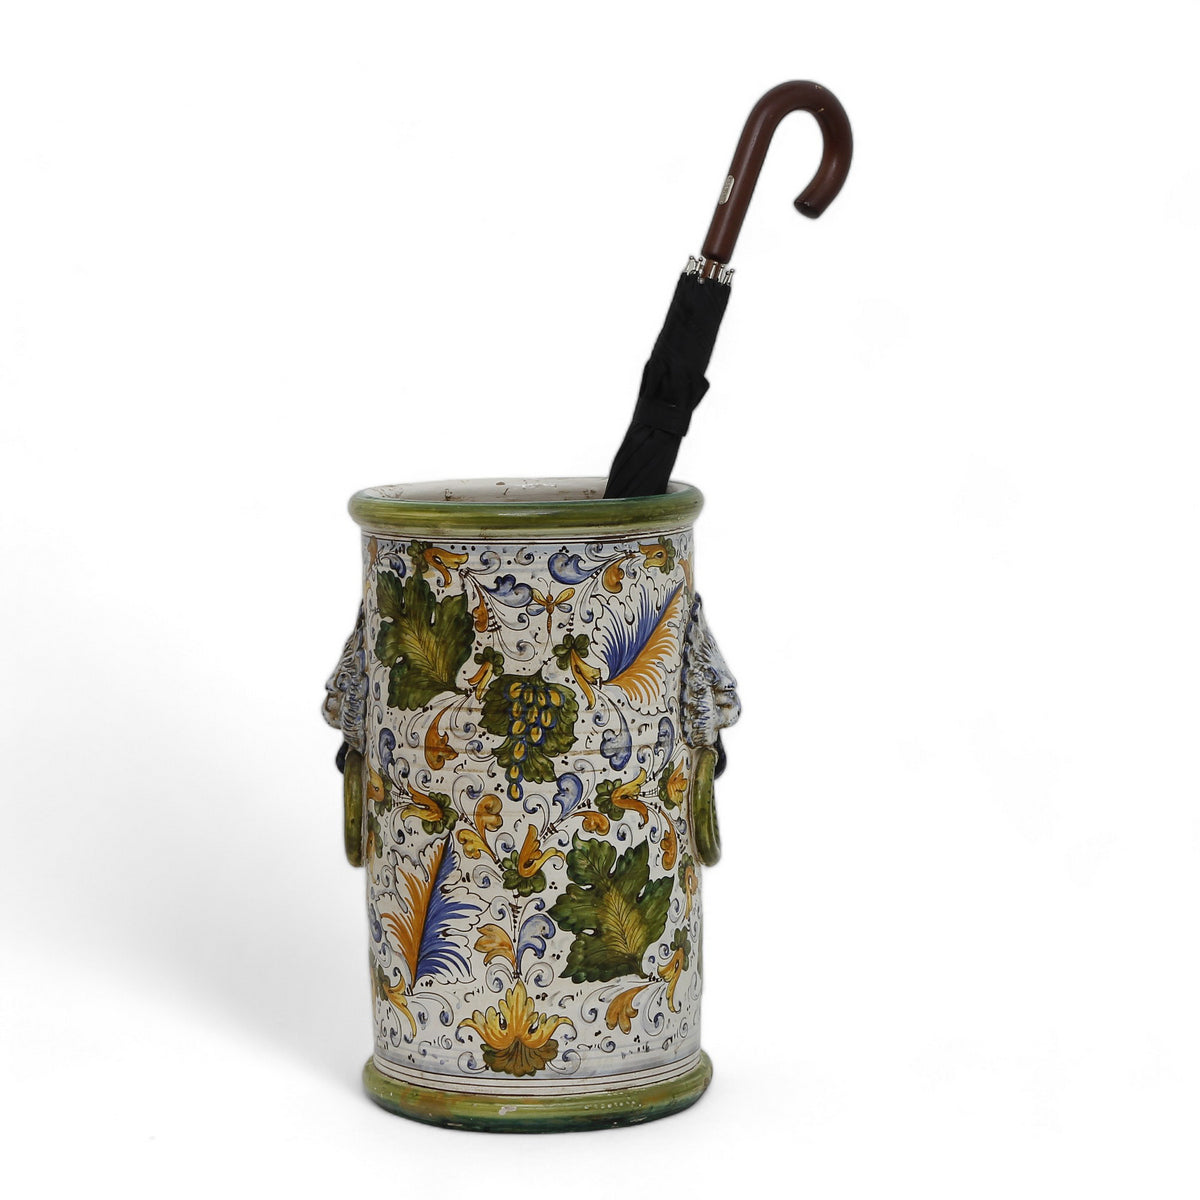 TUSCAN MAJOLICA: Large Umbrella Stand Vase hand painted with the renowned Caffagiolo Design